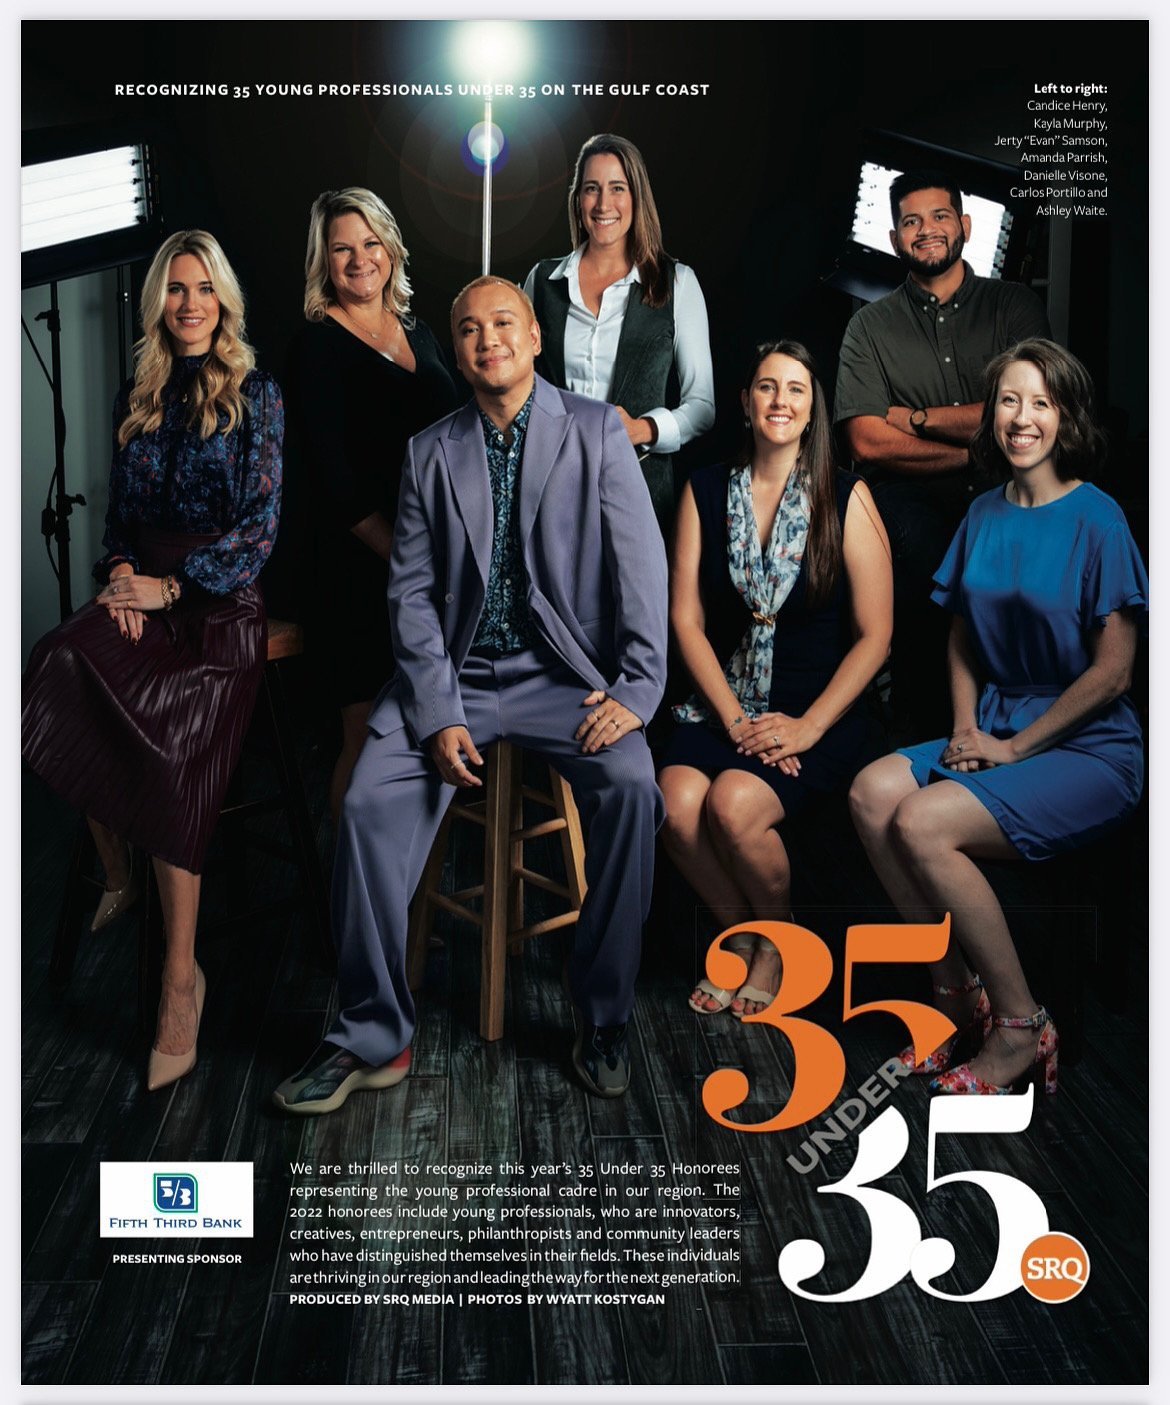 Named to 35 under 35 list